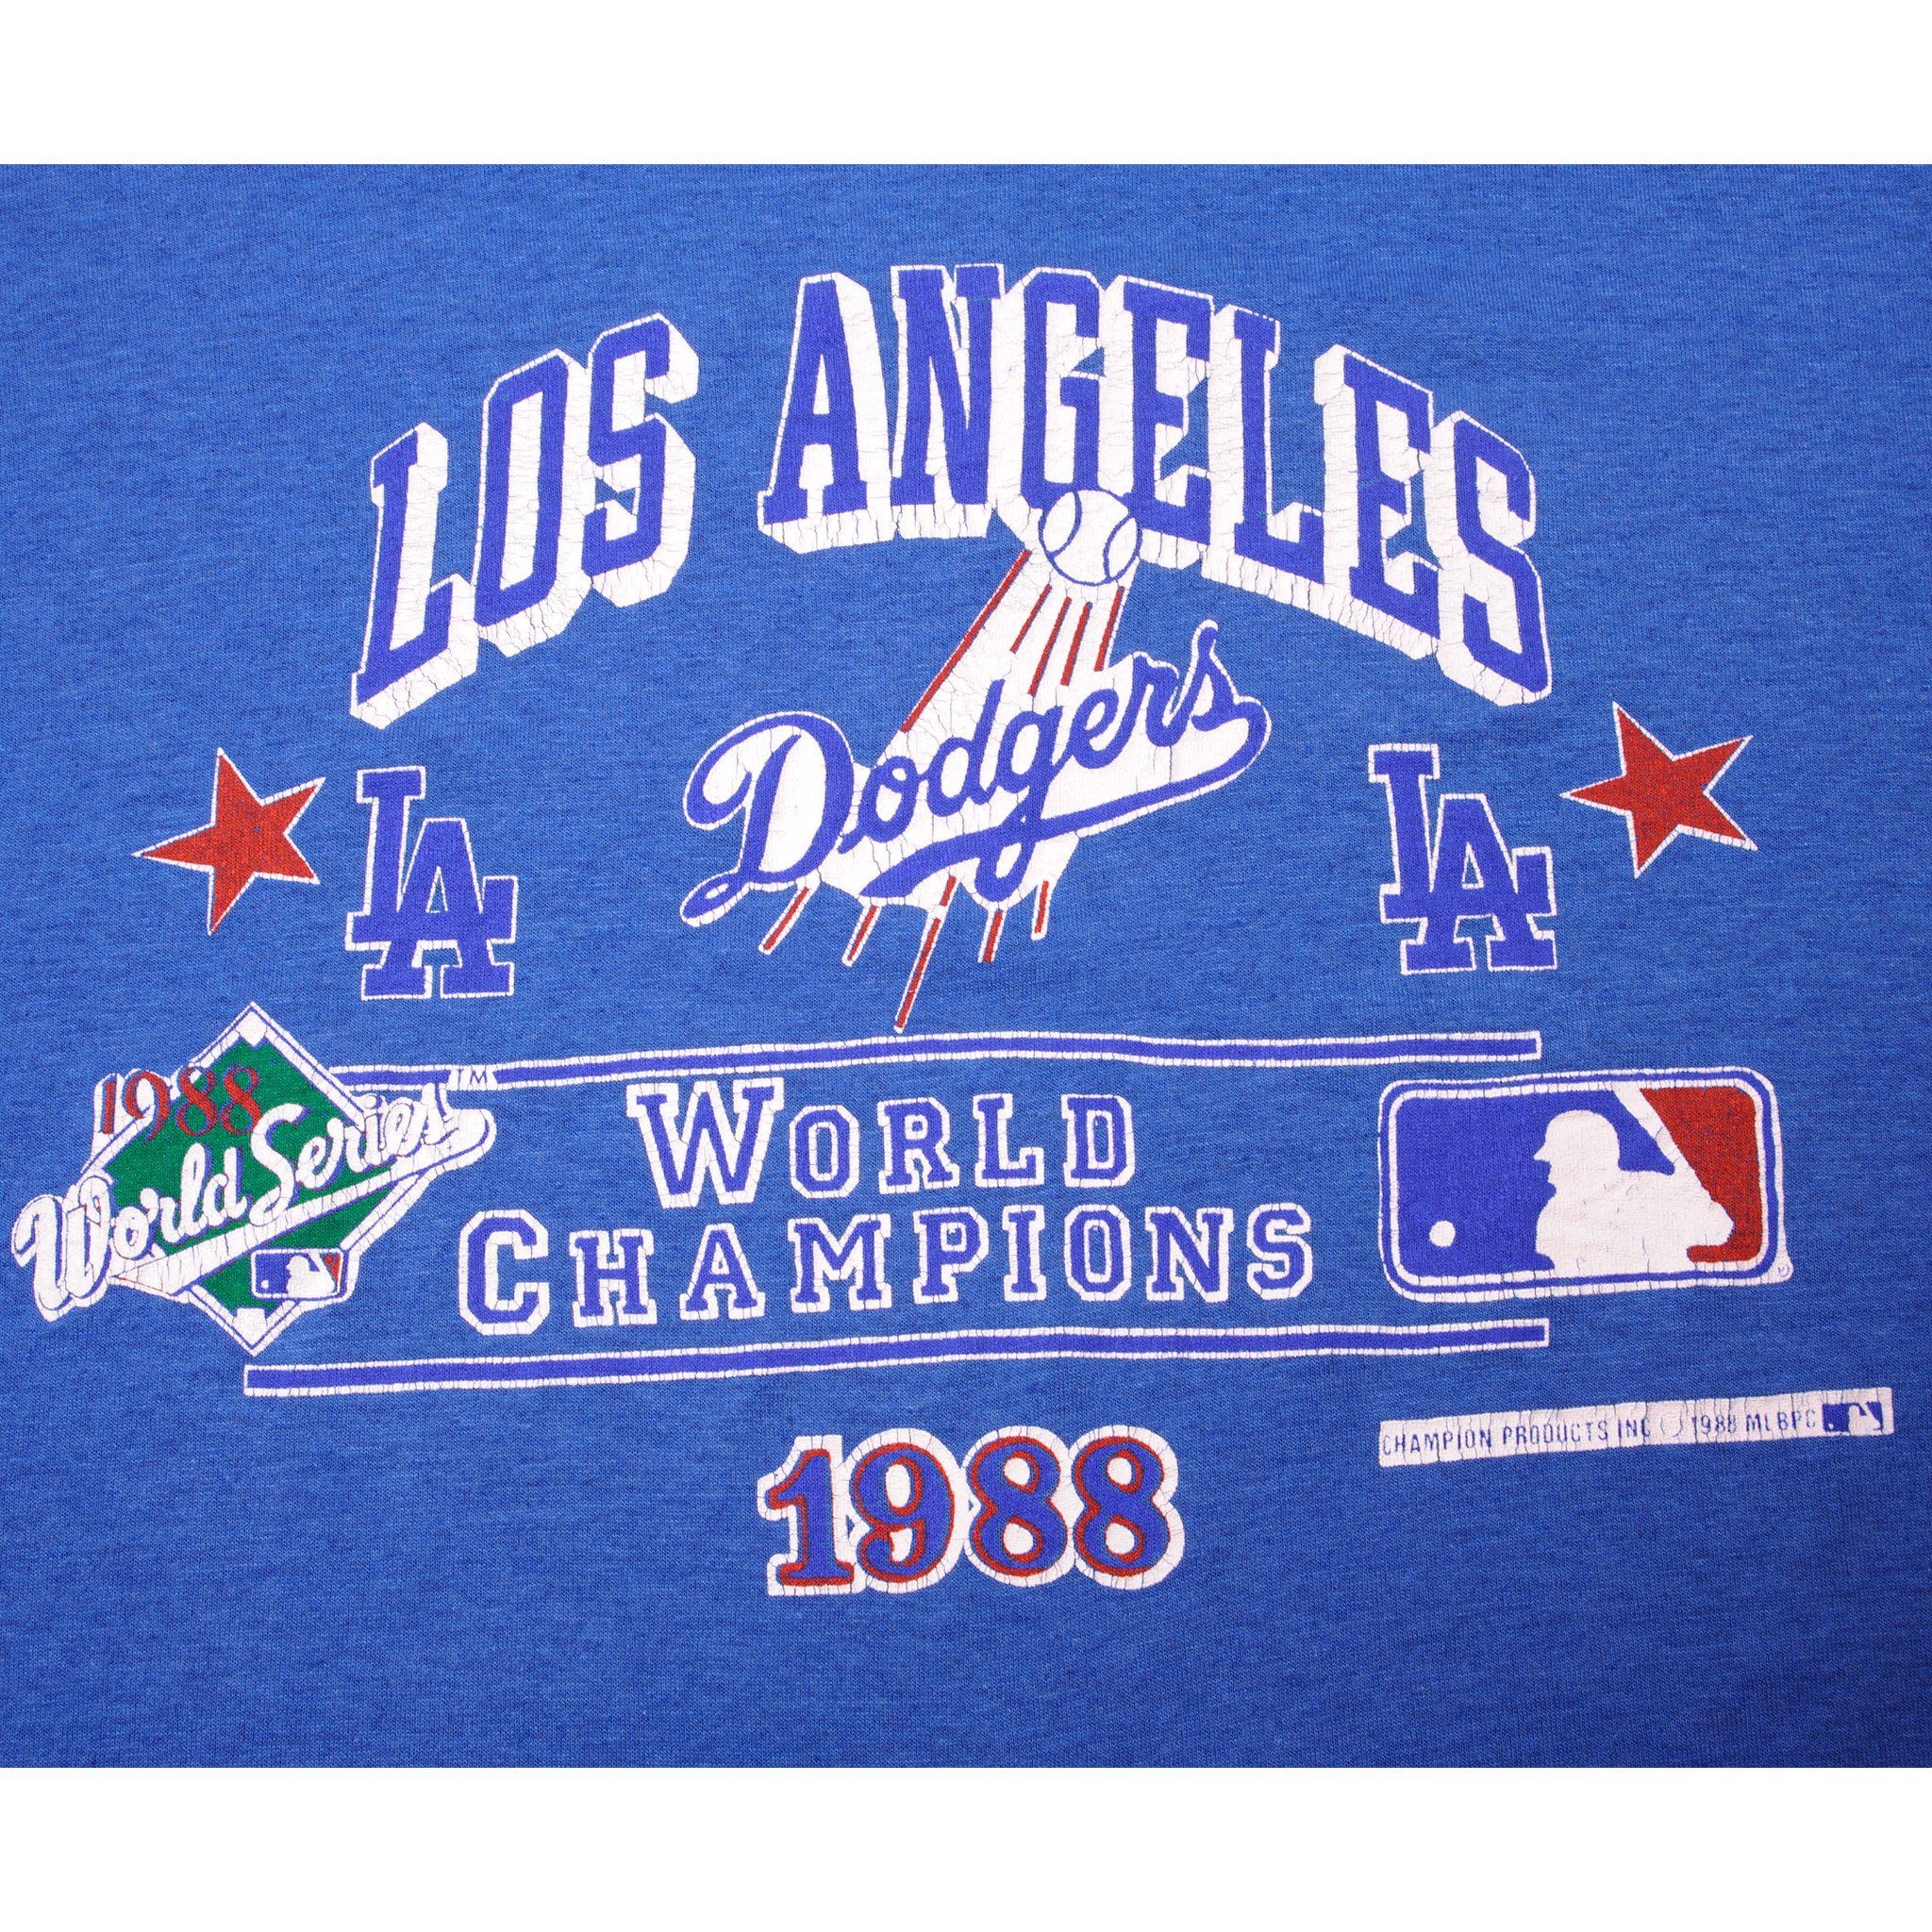 LegacyVintage99 Vintage Los Angeles Dodgers 1988 World Series Champions MLB Screen Stars Made USA New with Tags 1980s 80s California Baseball Tee T Shirt